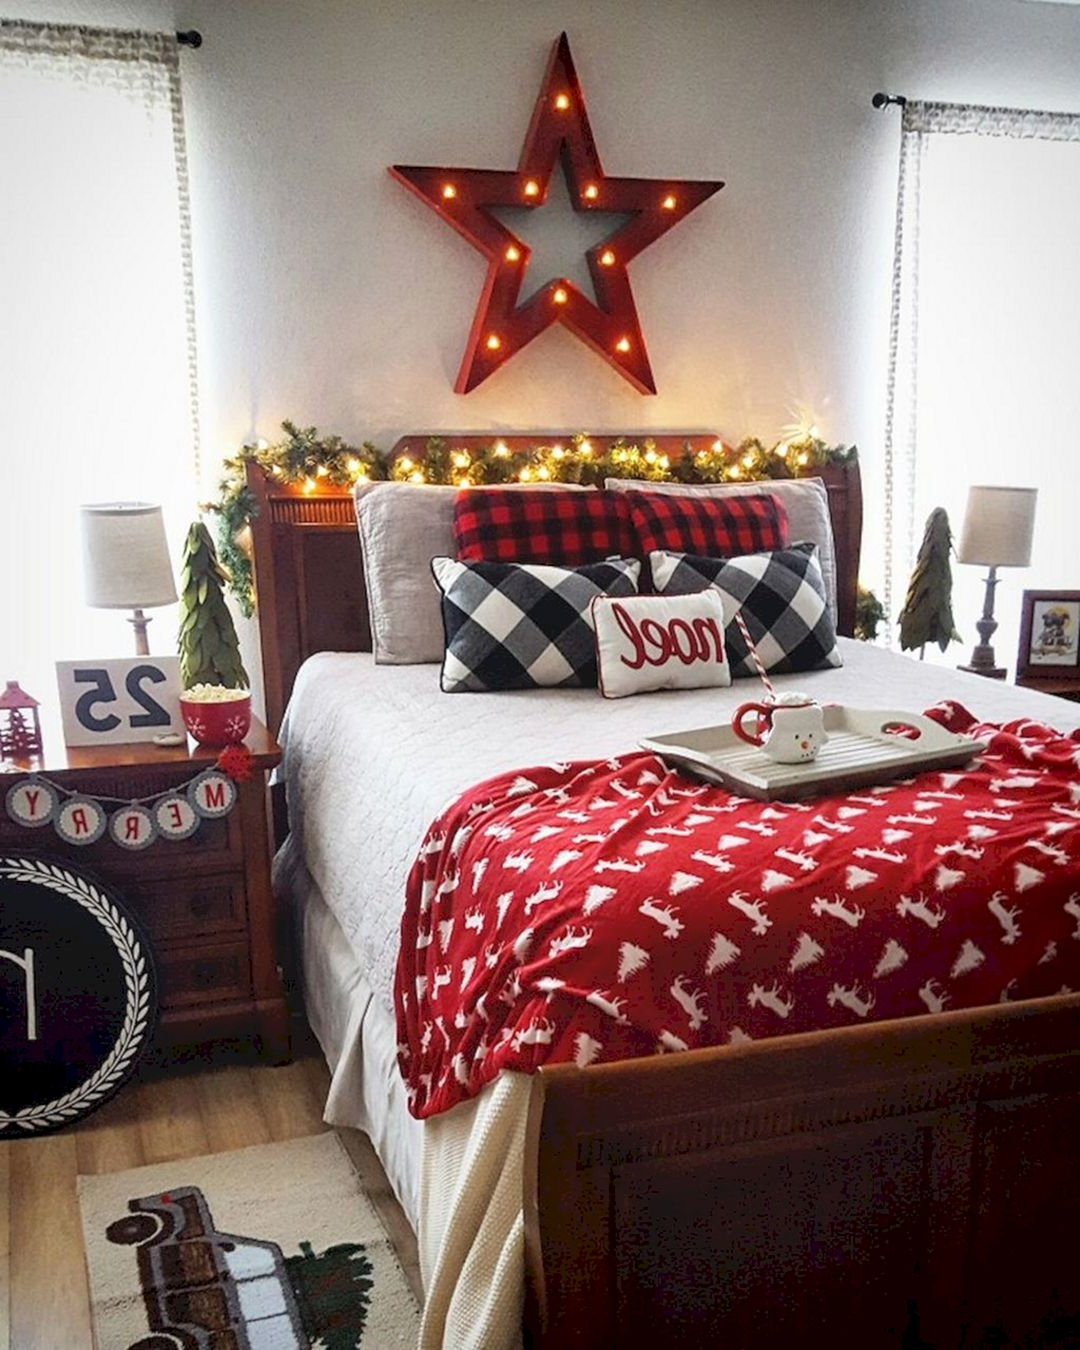 45 Adorable Interior Themed Christmas Bedroom Decorating